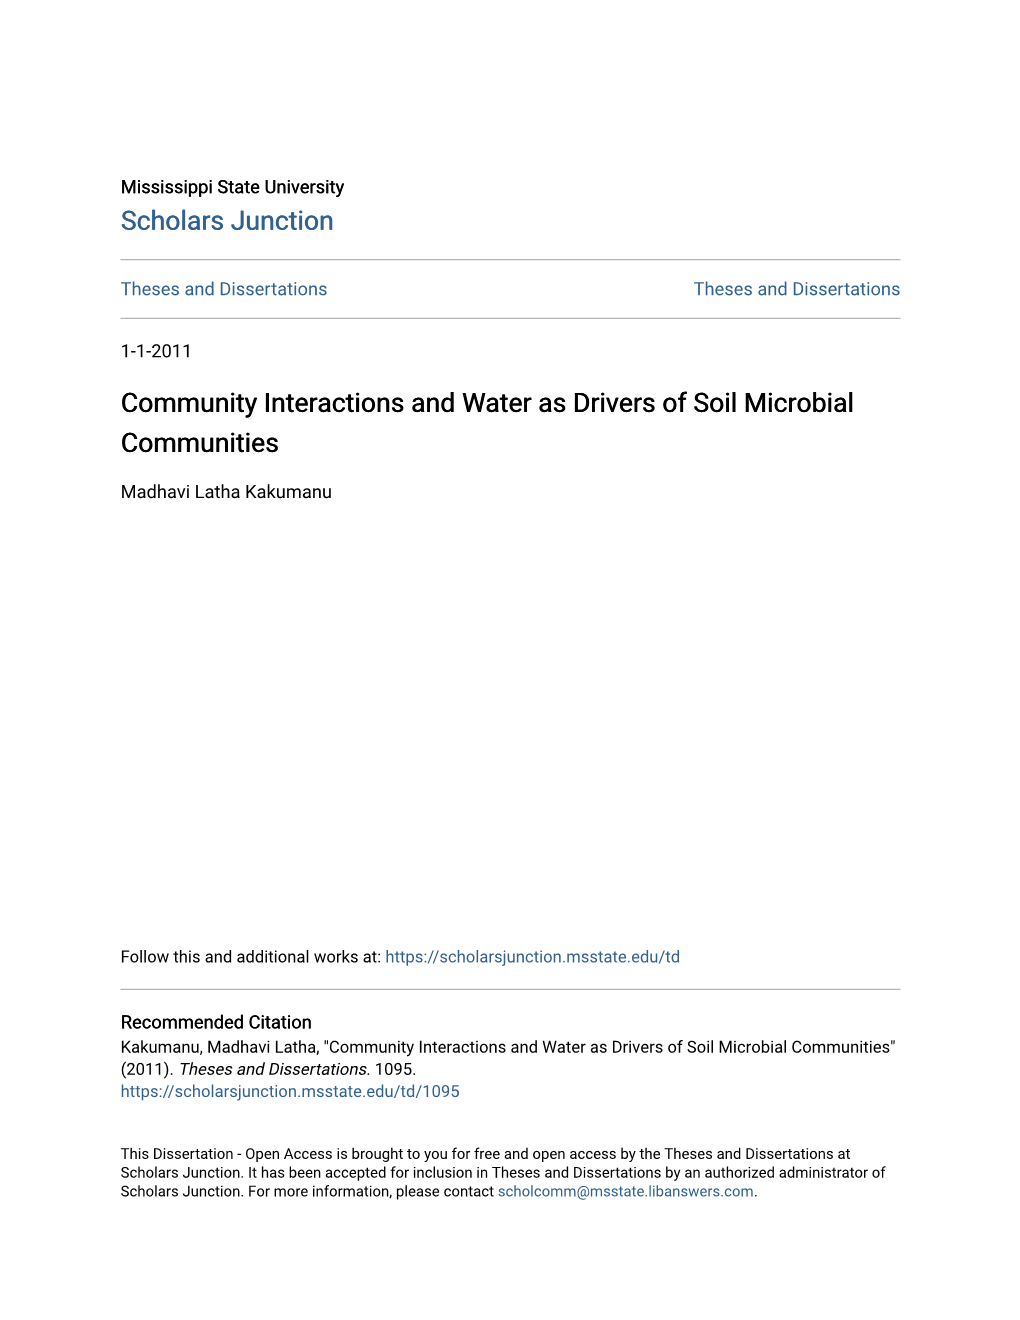 Community Interactions and Water As Drivers of Soil Microbial Communities